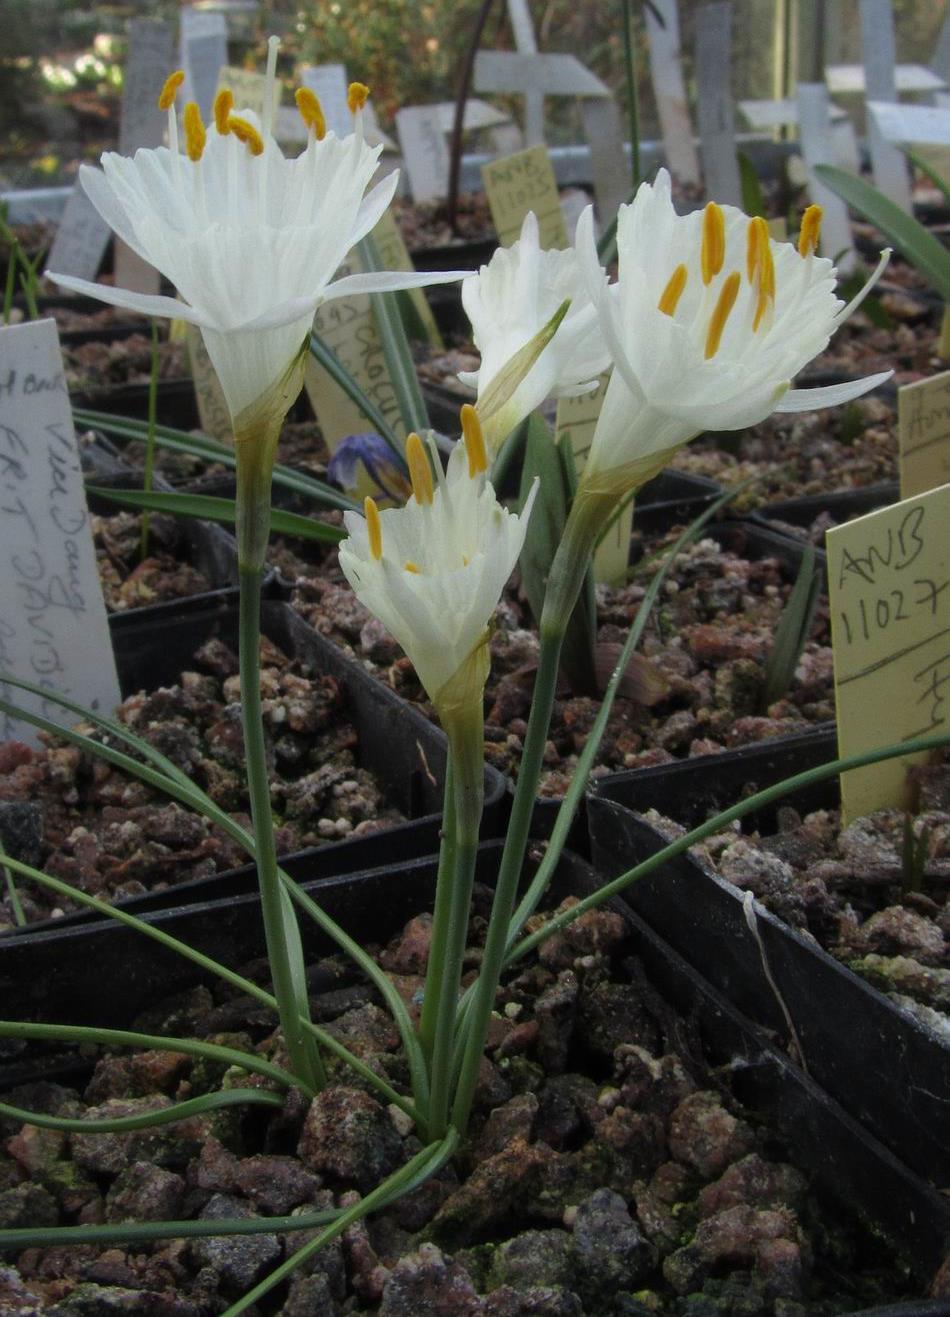 Narcissus cantabricus Rafa Díez Domínguez may recognise this superb crystalline white Narcissus cantabricus, raised from seed, although Rafa is more used to seeing them in larger quantities growing